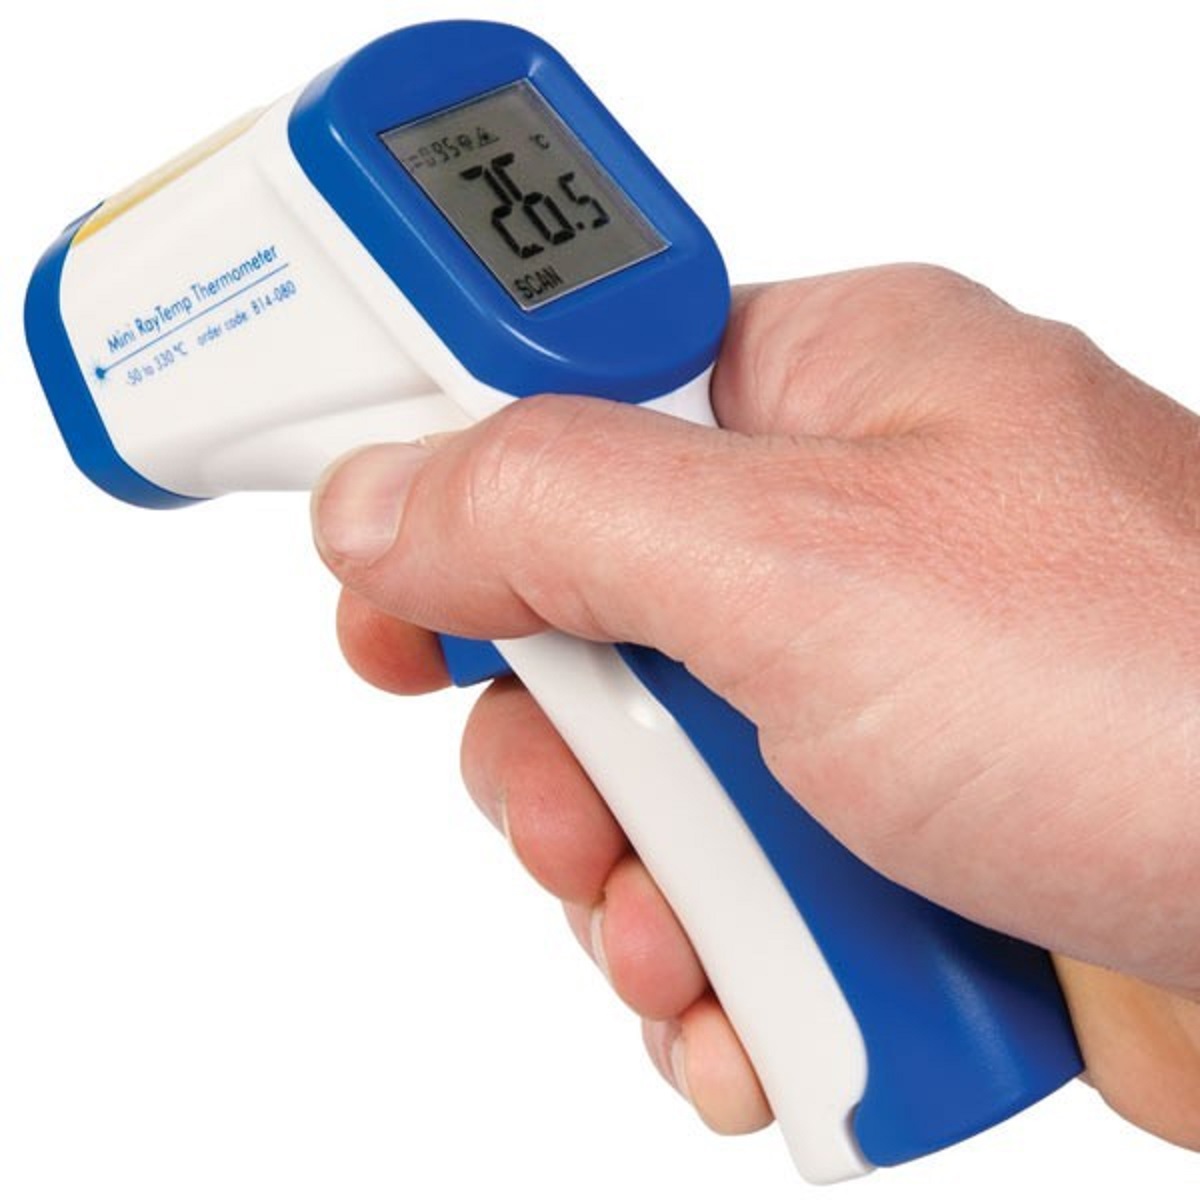 https://www.thermometersdirect.co.uk/user/products/large/mini-raytemp-infrared-thermometer-close(1).jpg